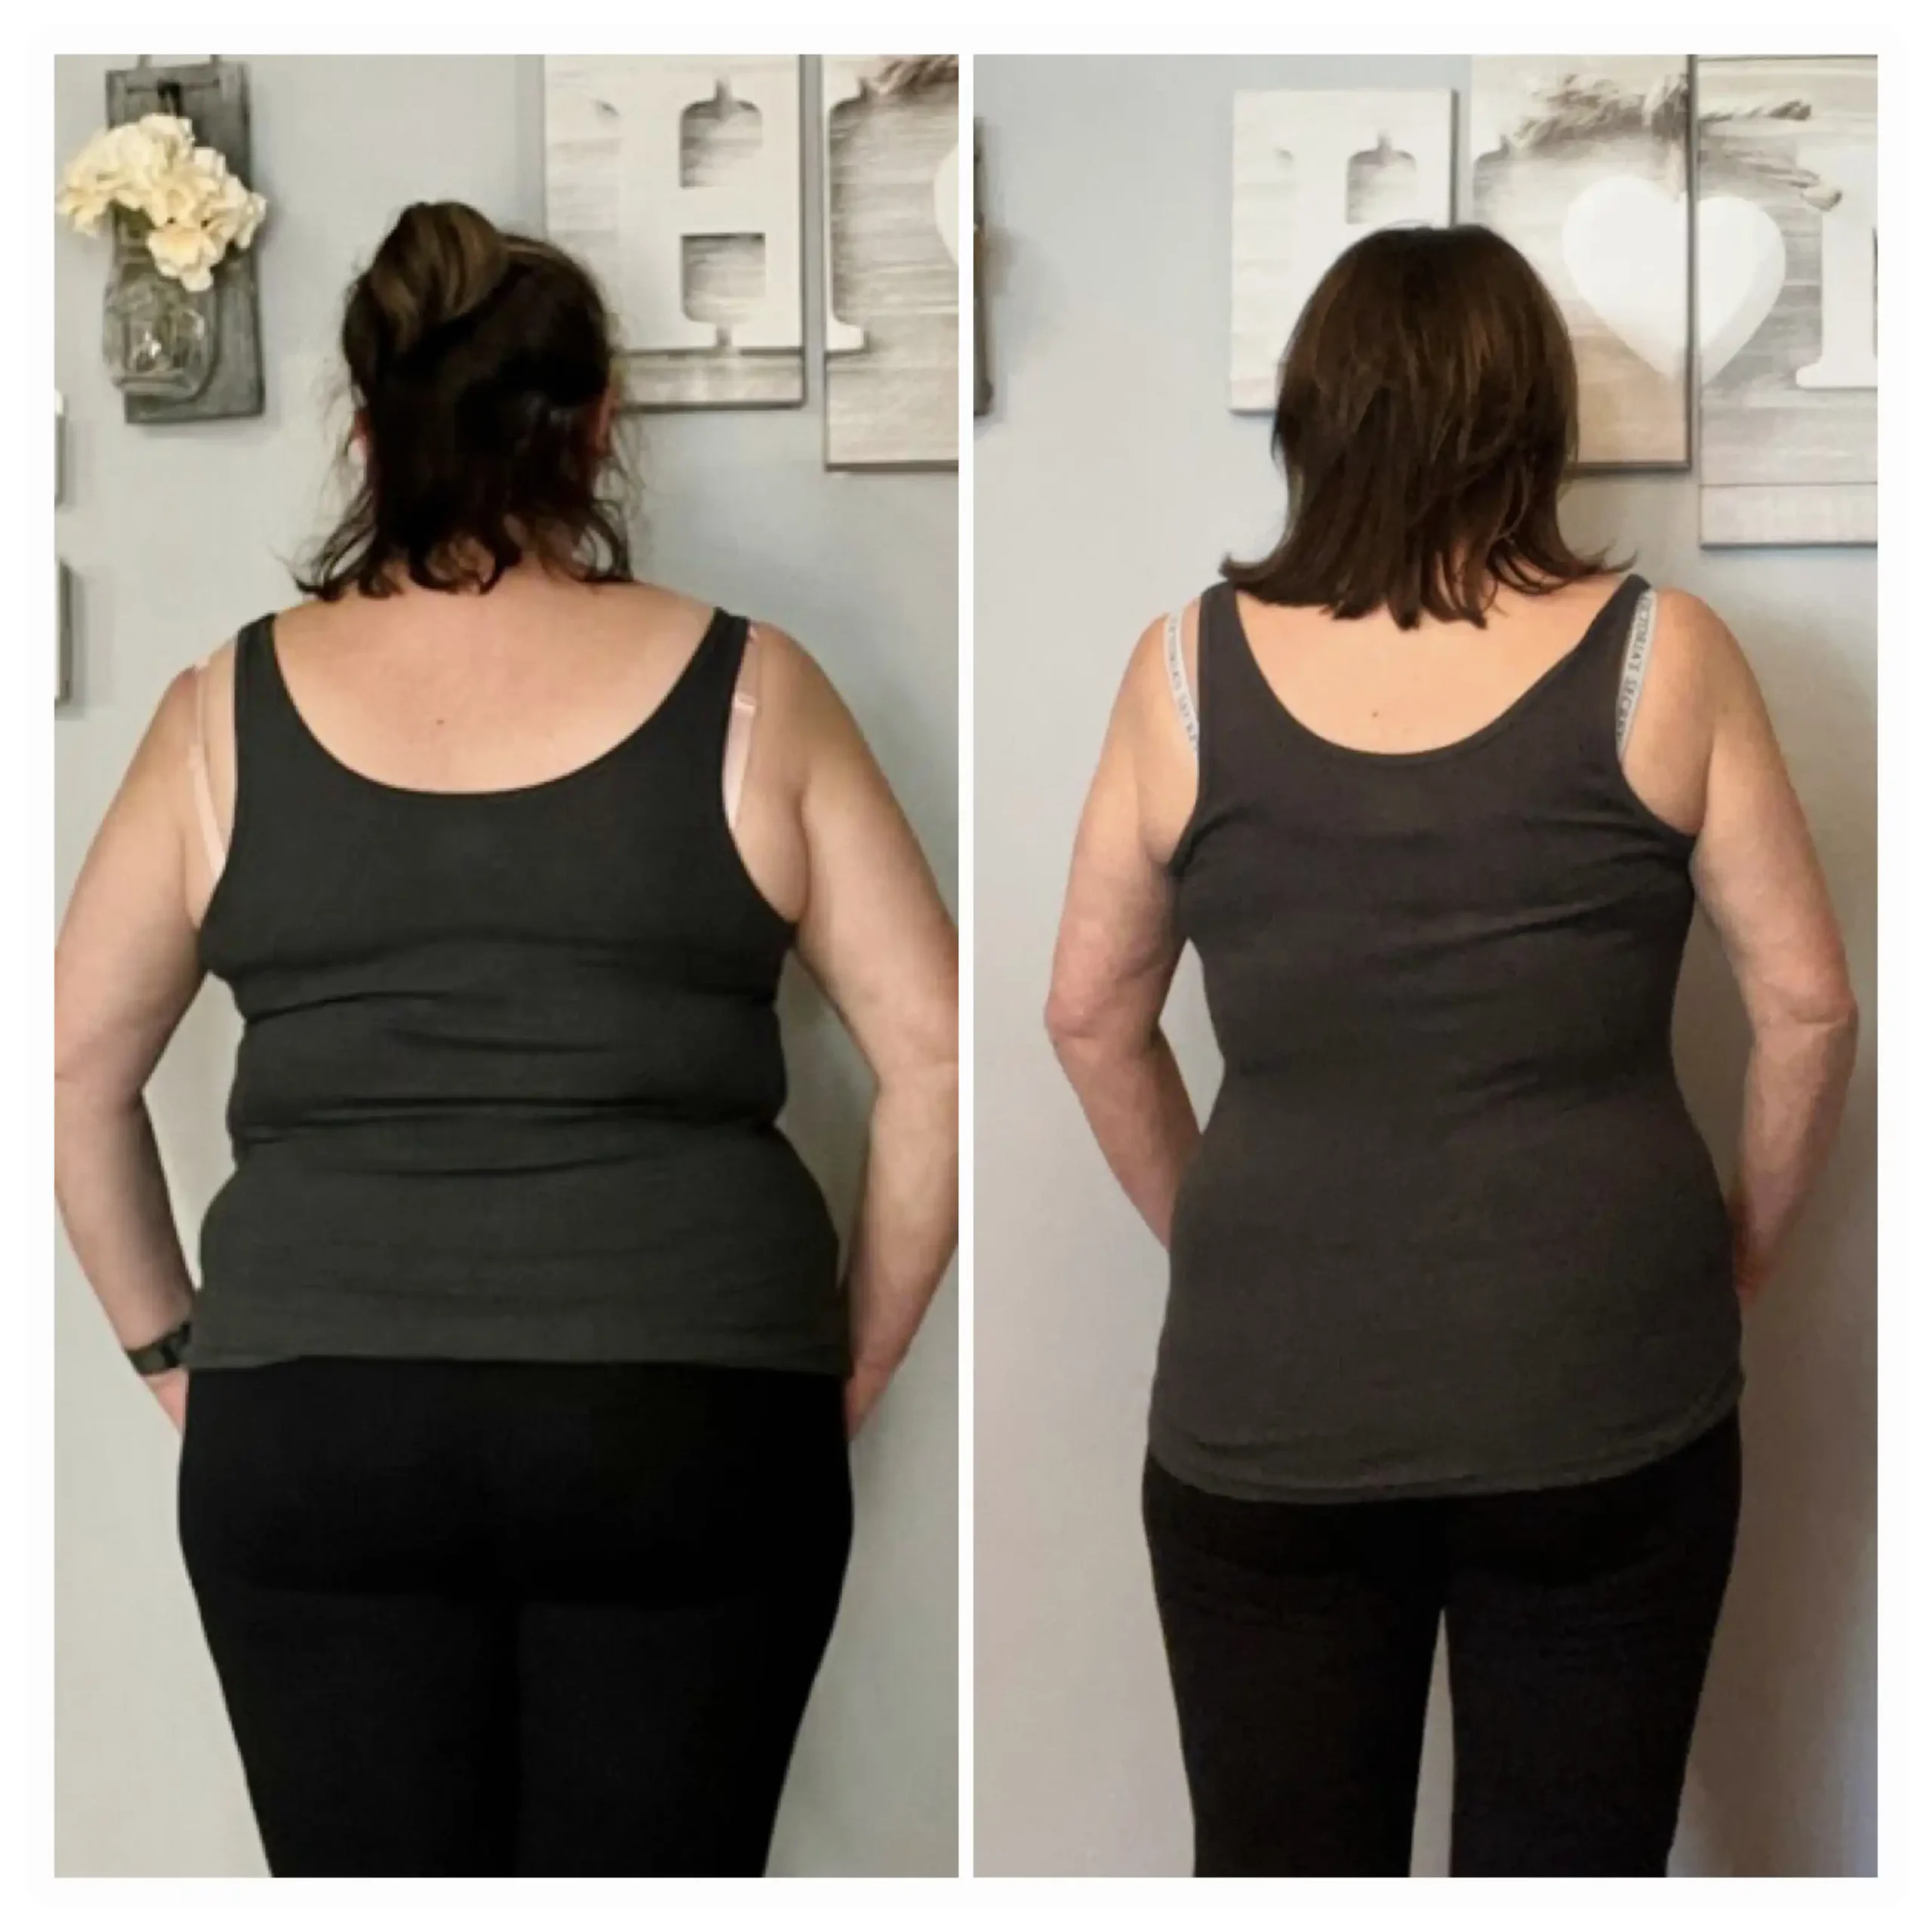 Lisa before and after weight loss back view